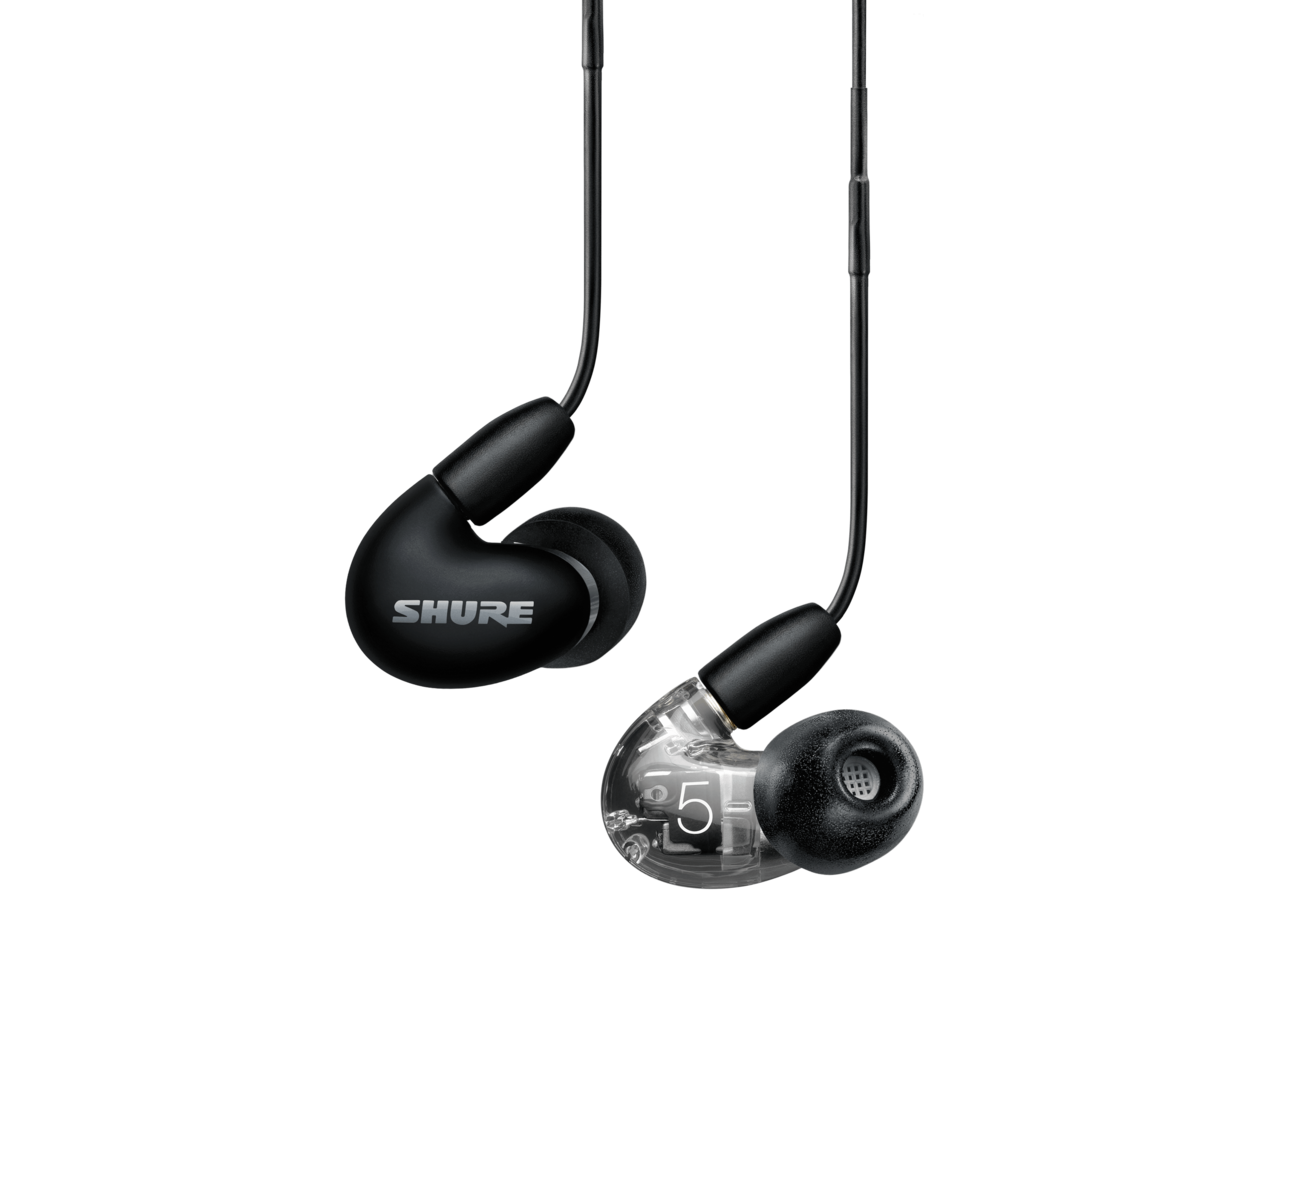 Shure Triple-Driver AONIC 5 Sound Isolating™ Earphones - Black